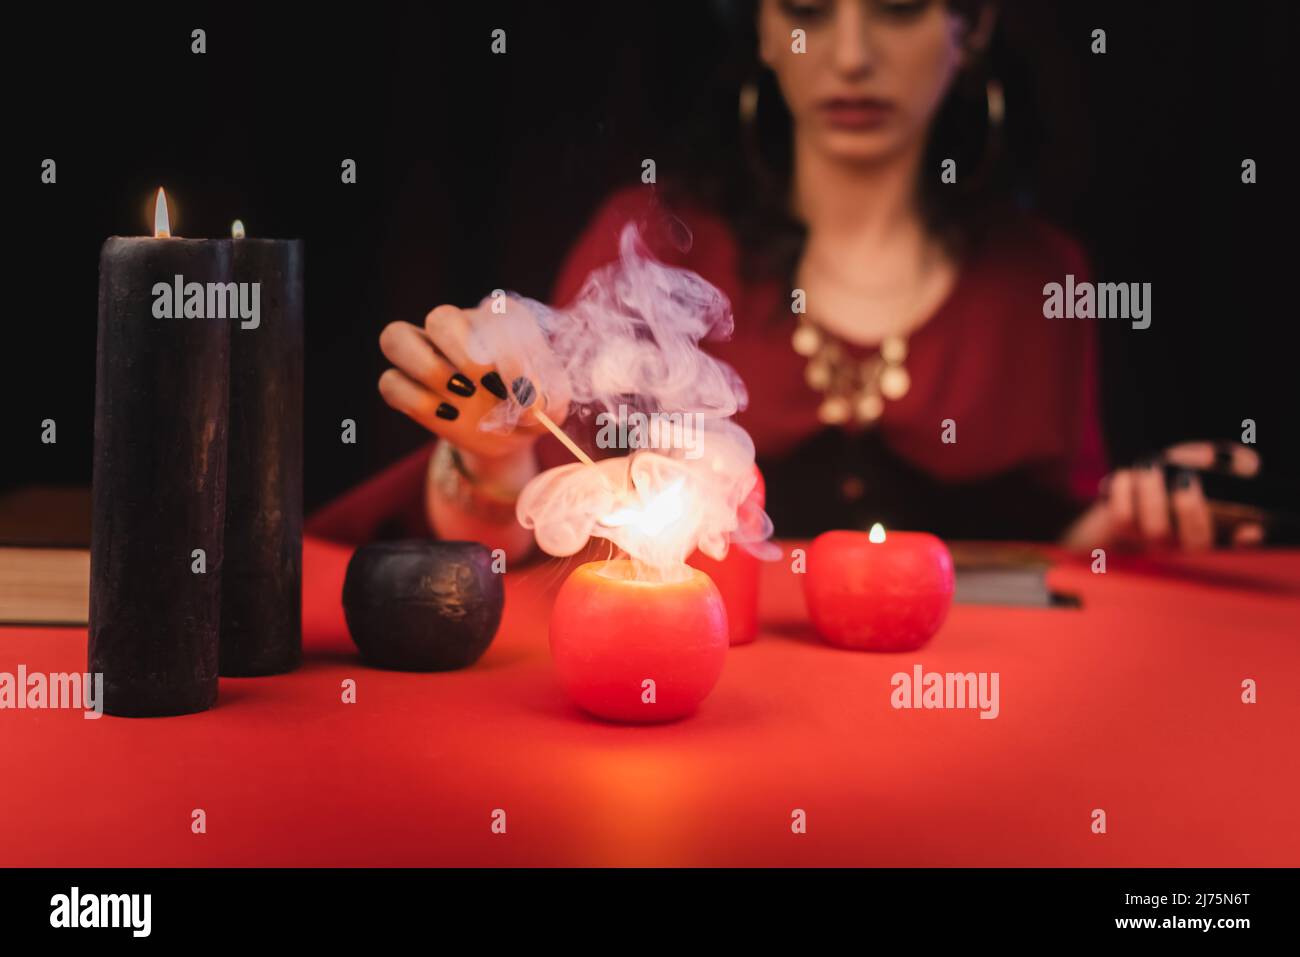 Cropped view of blurred soothsayer burning red candle on table isolated on black Stock Photo